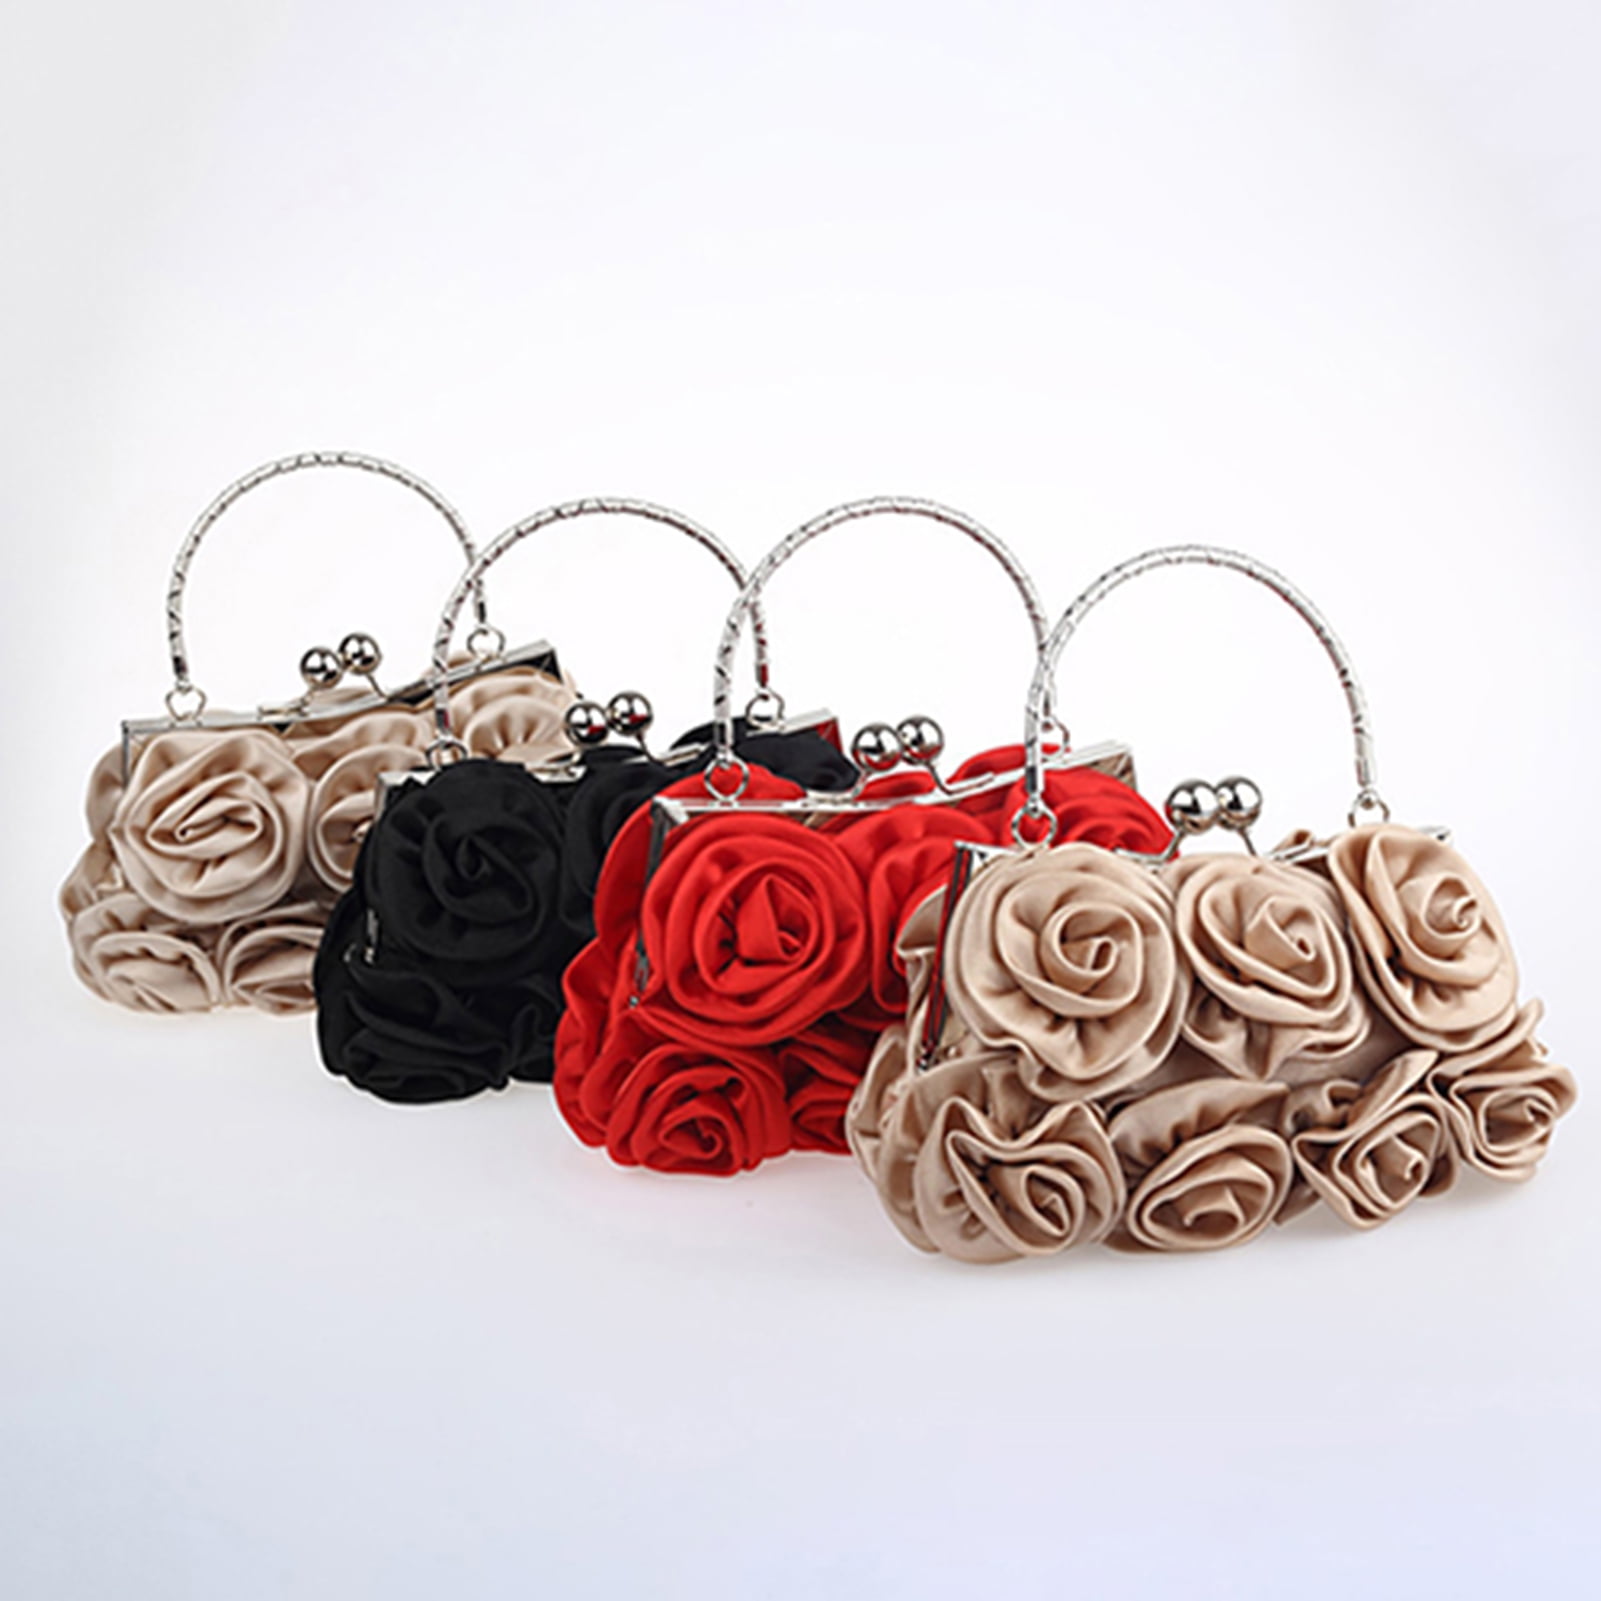 fcity.in - Sriaog Handmade Mini Hand Bag For Women Wedding Bridal Bag For  Ladies